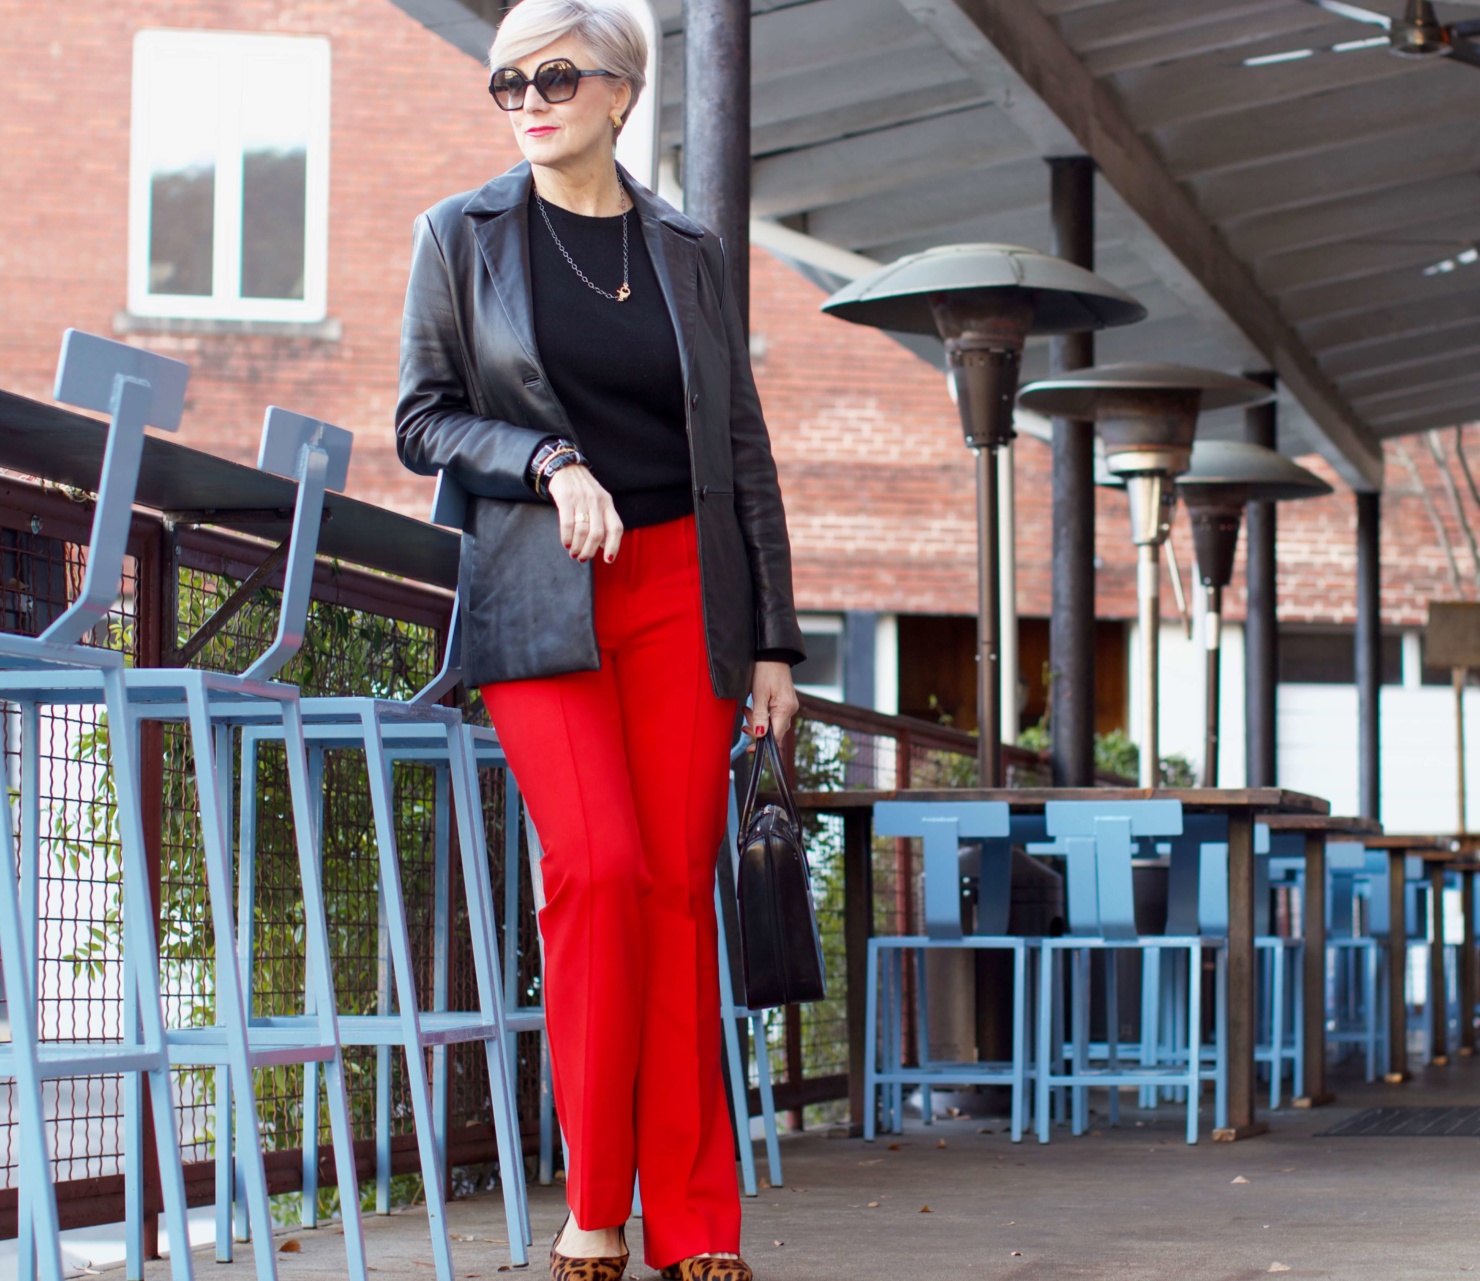 beth from Style at a Certain Age wears Anthropologie red pants, Everlane black cashmere crewneck, black leather blazer, and leopard pumps